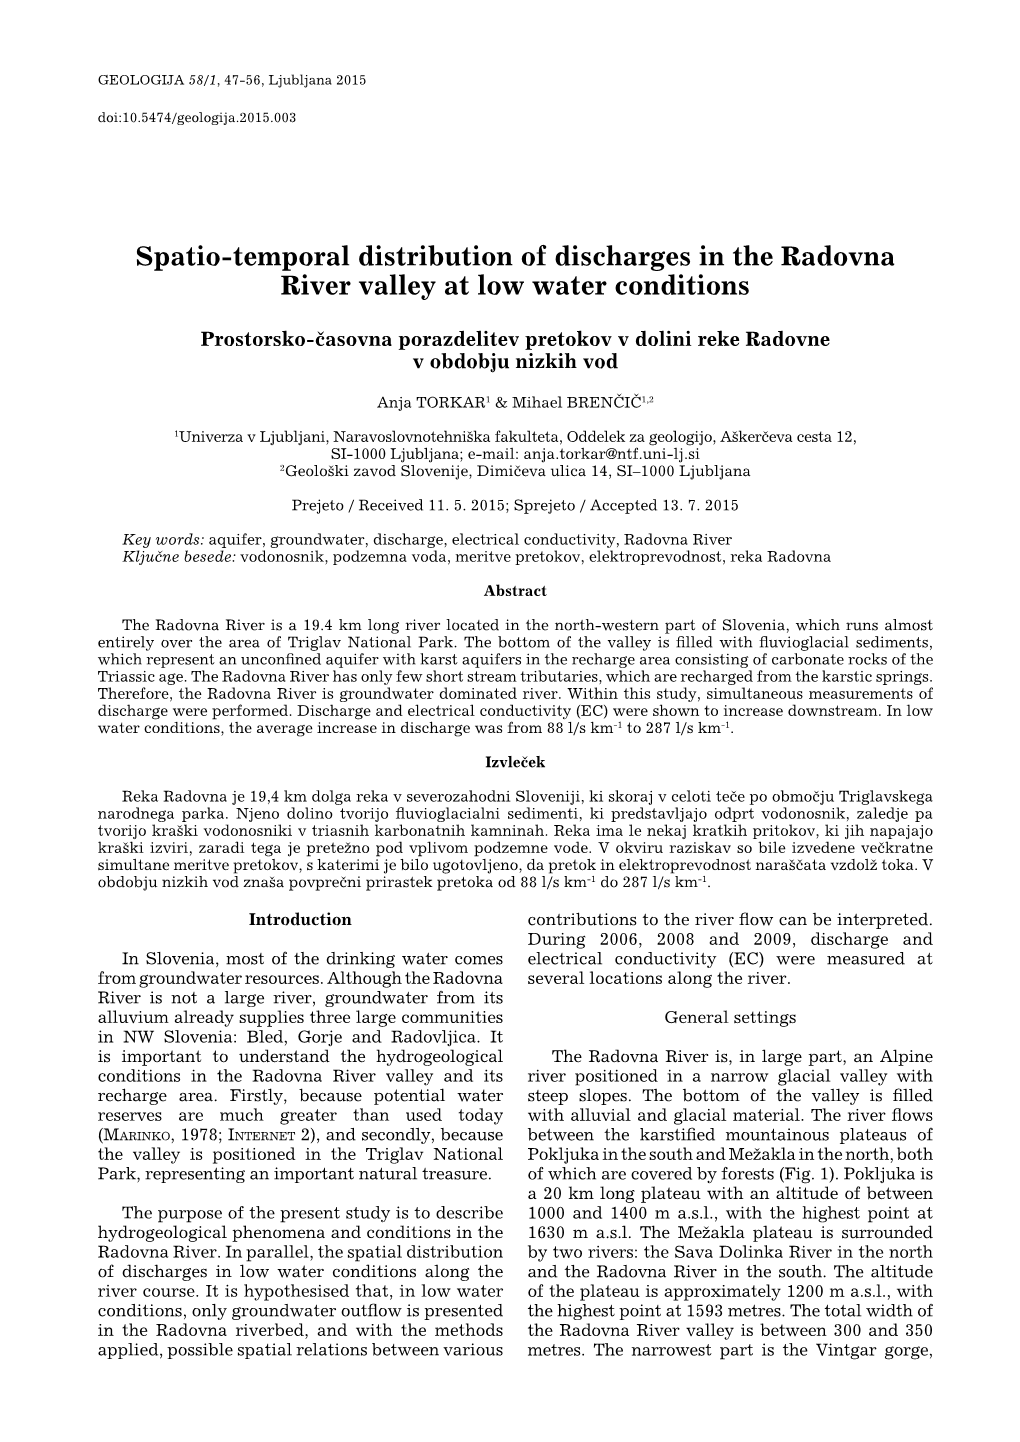 Spatio-Temporal Distribution of Discharges in the Radovna River Valley at Low Water Conditions